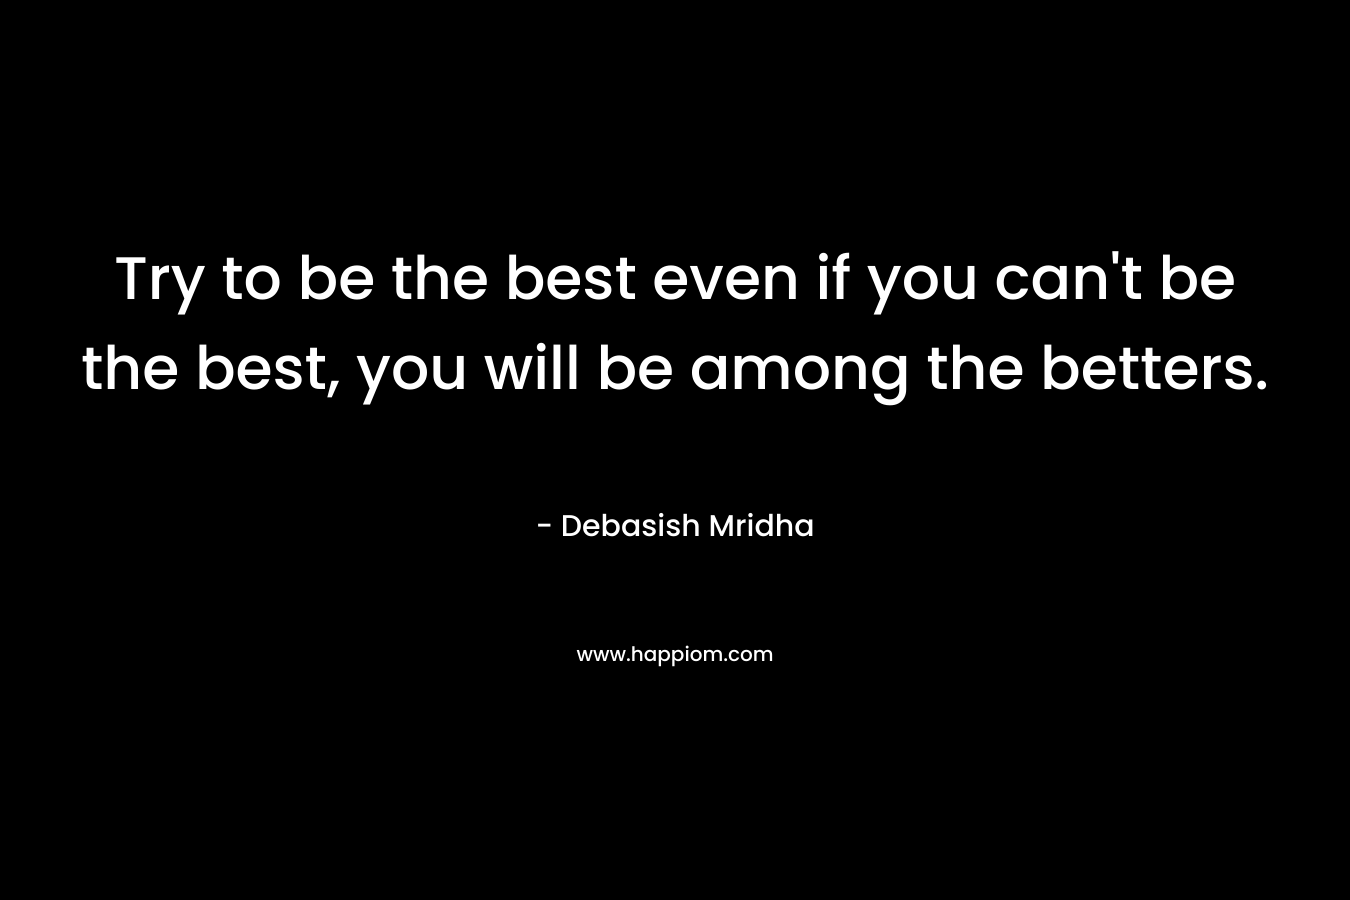 Try to be the best even if you can’t be the best, you will be among the betters. – Debasish Mridha